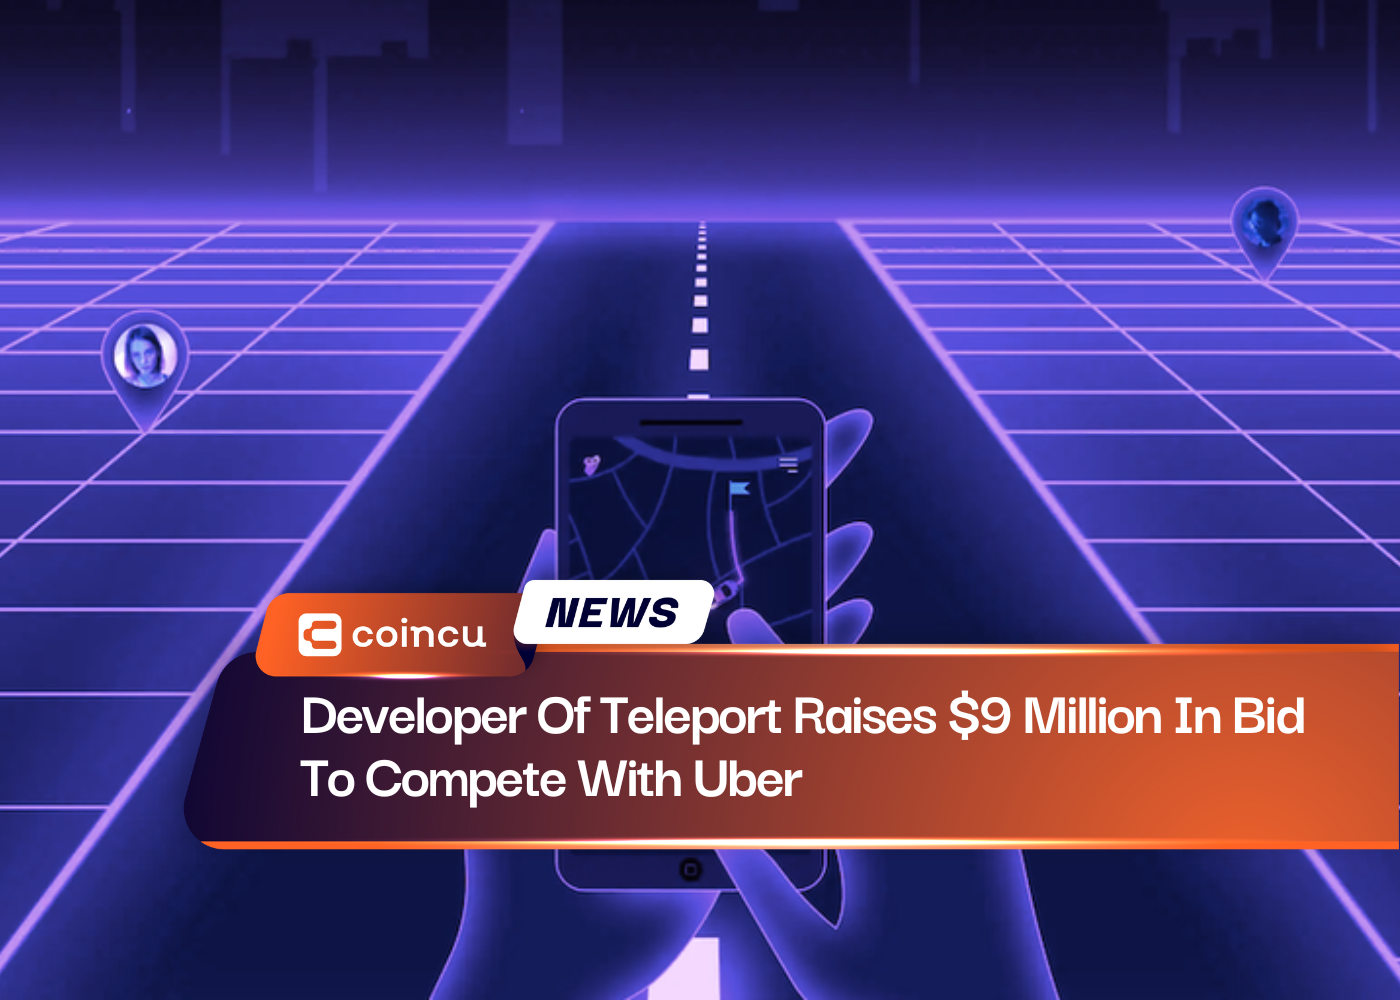 Developer Of Teleport Raises $9 Million In Bid To Compete With Uber